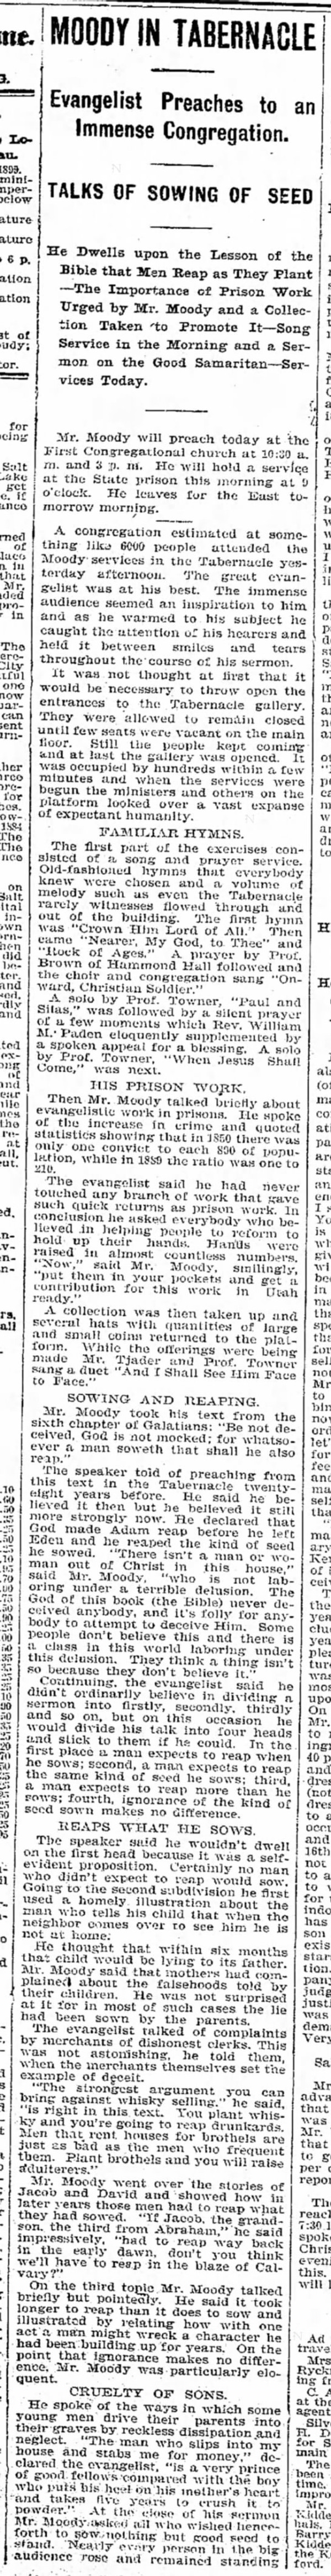 Newspaper article titled Moody in Tabernacle